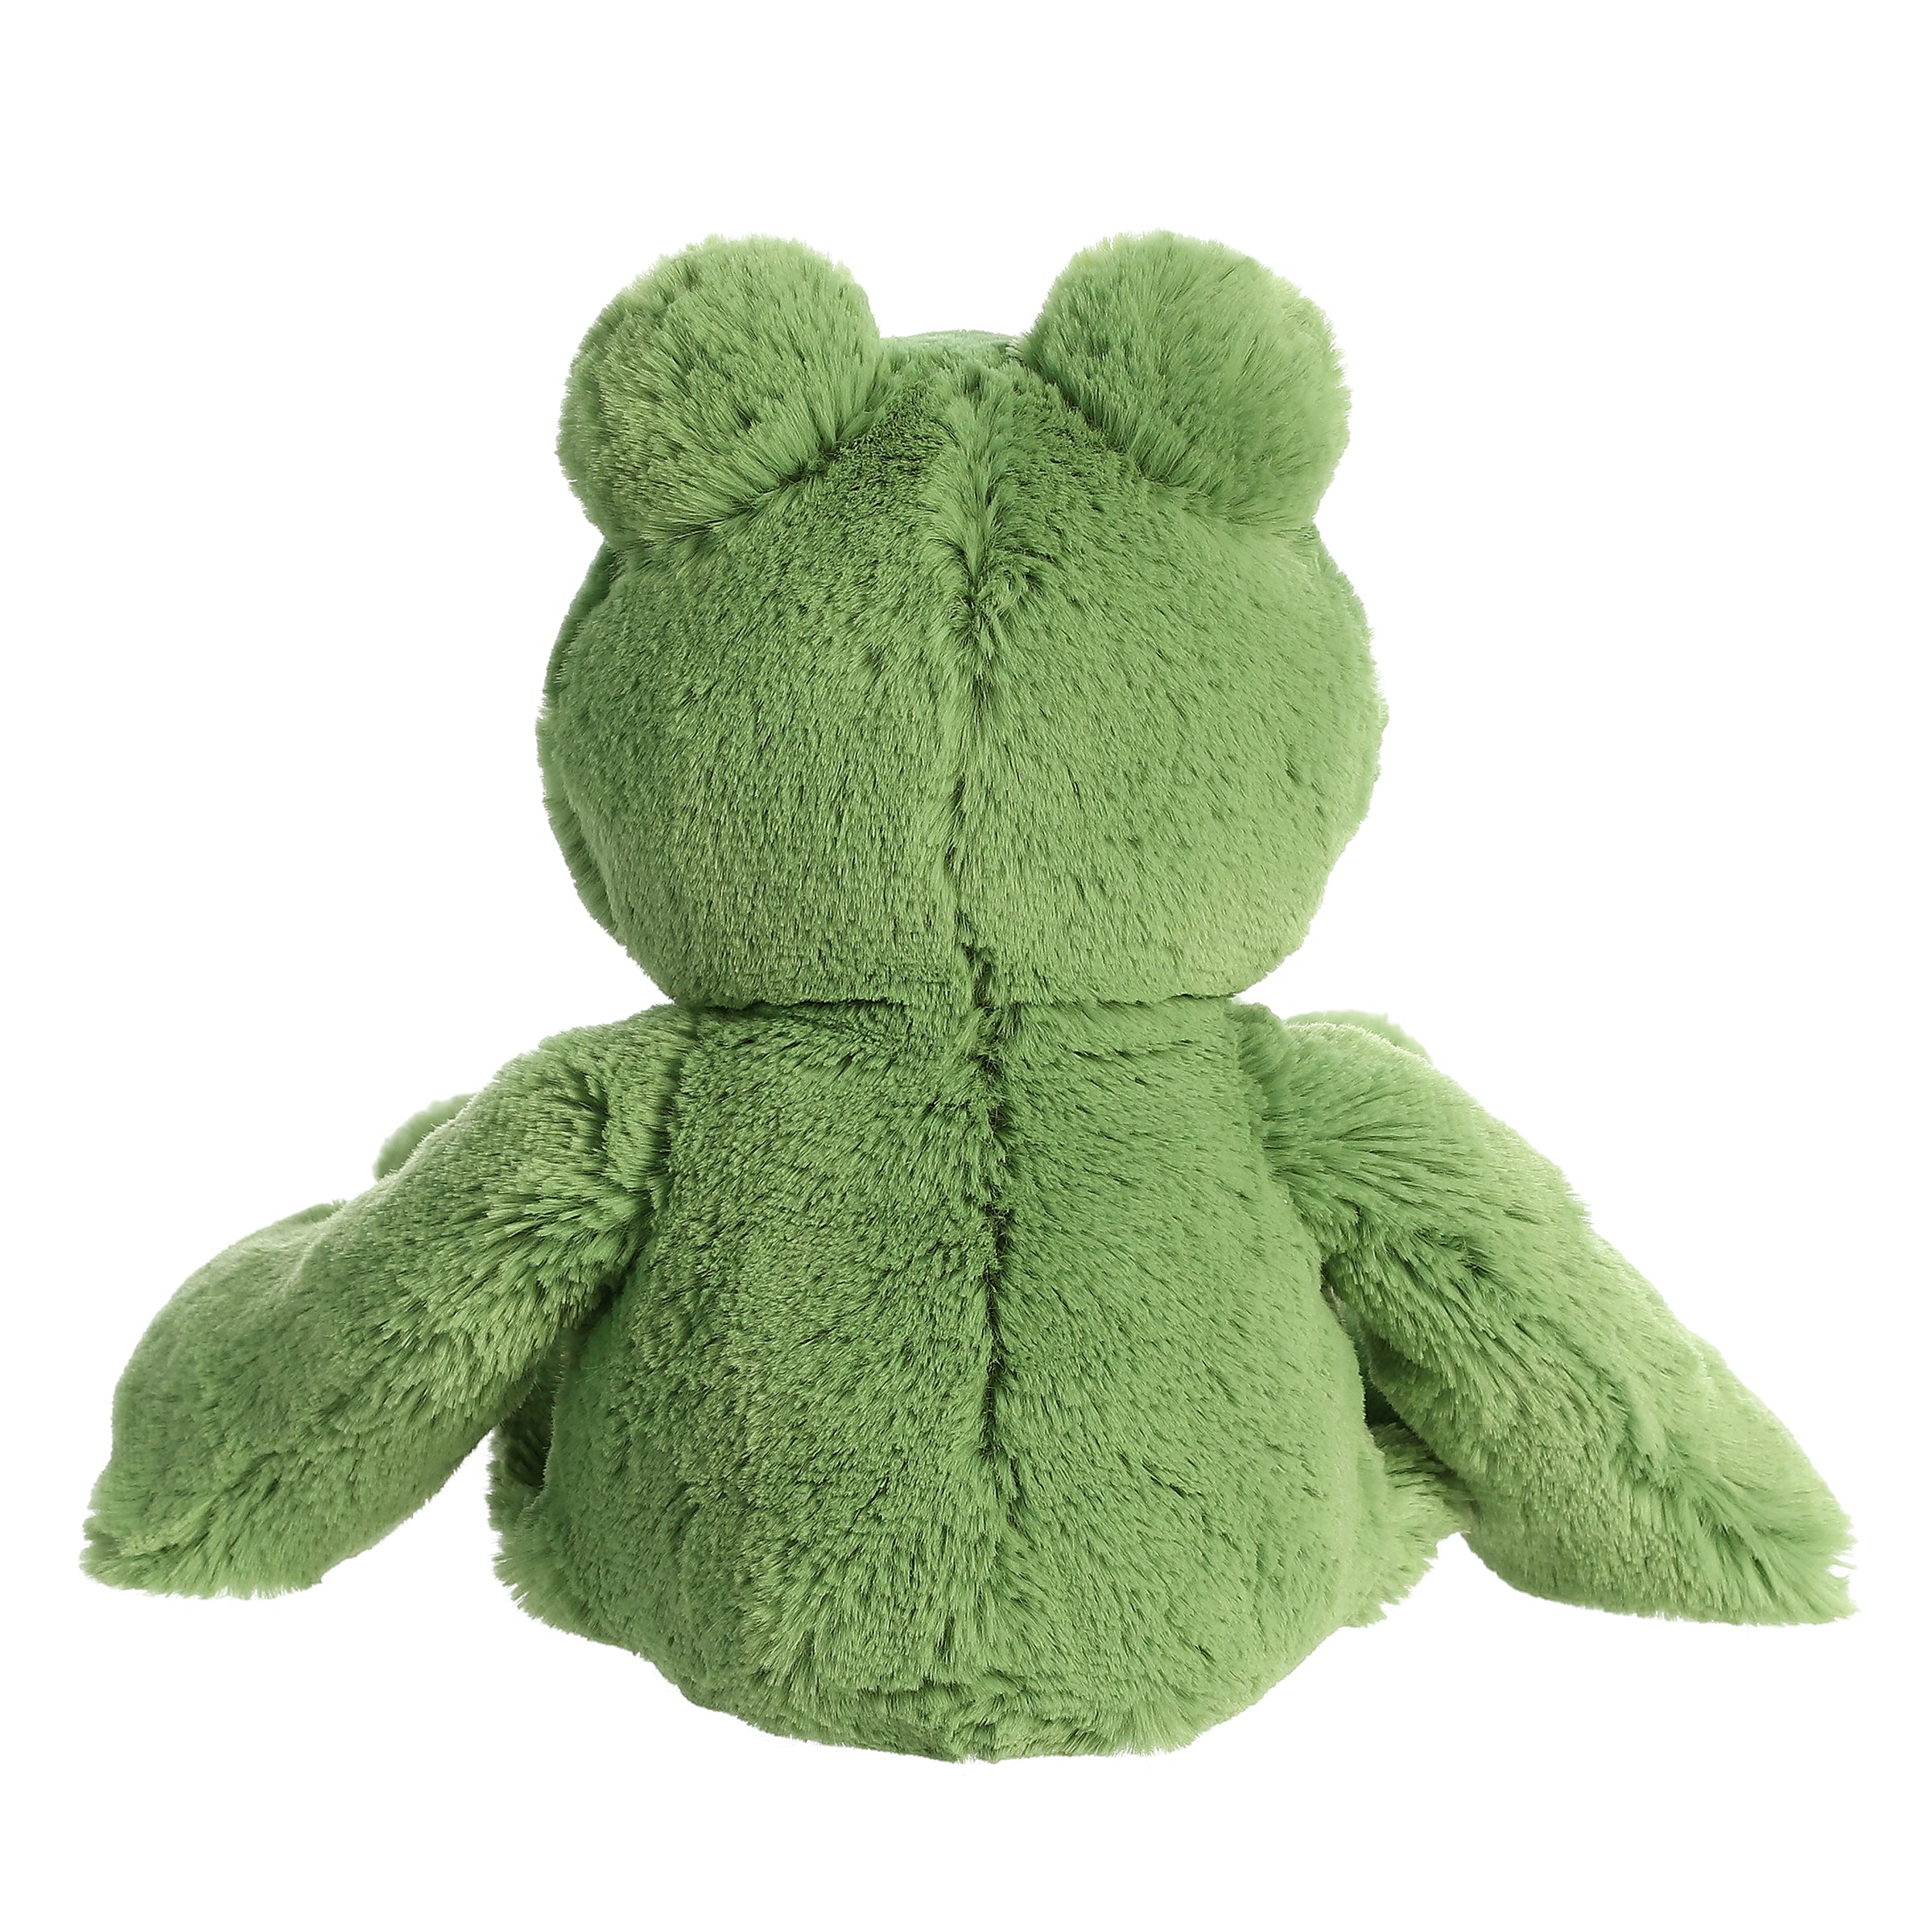 Doll Frog Plush Giant Frog Stuffed Animal Soft Toy, 29 Inches Large